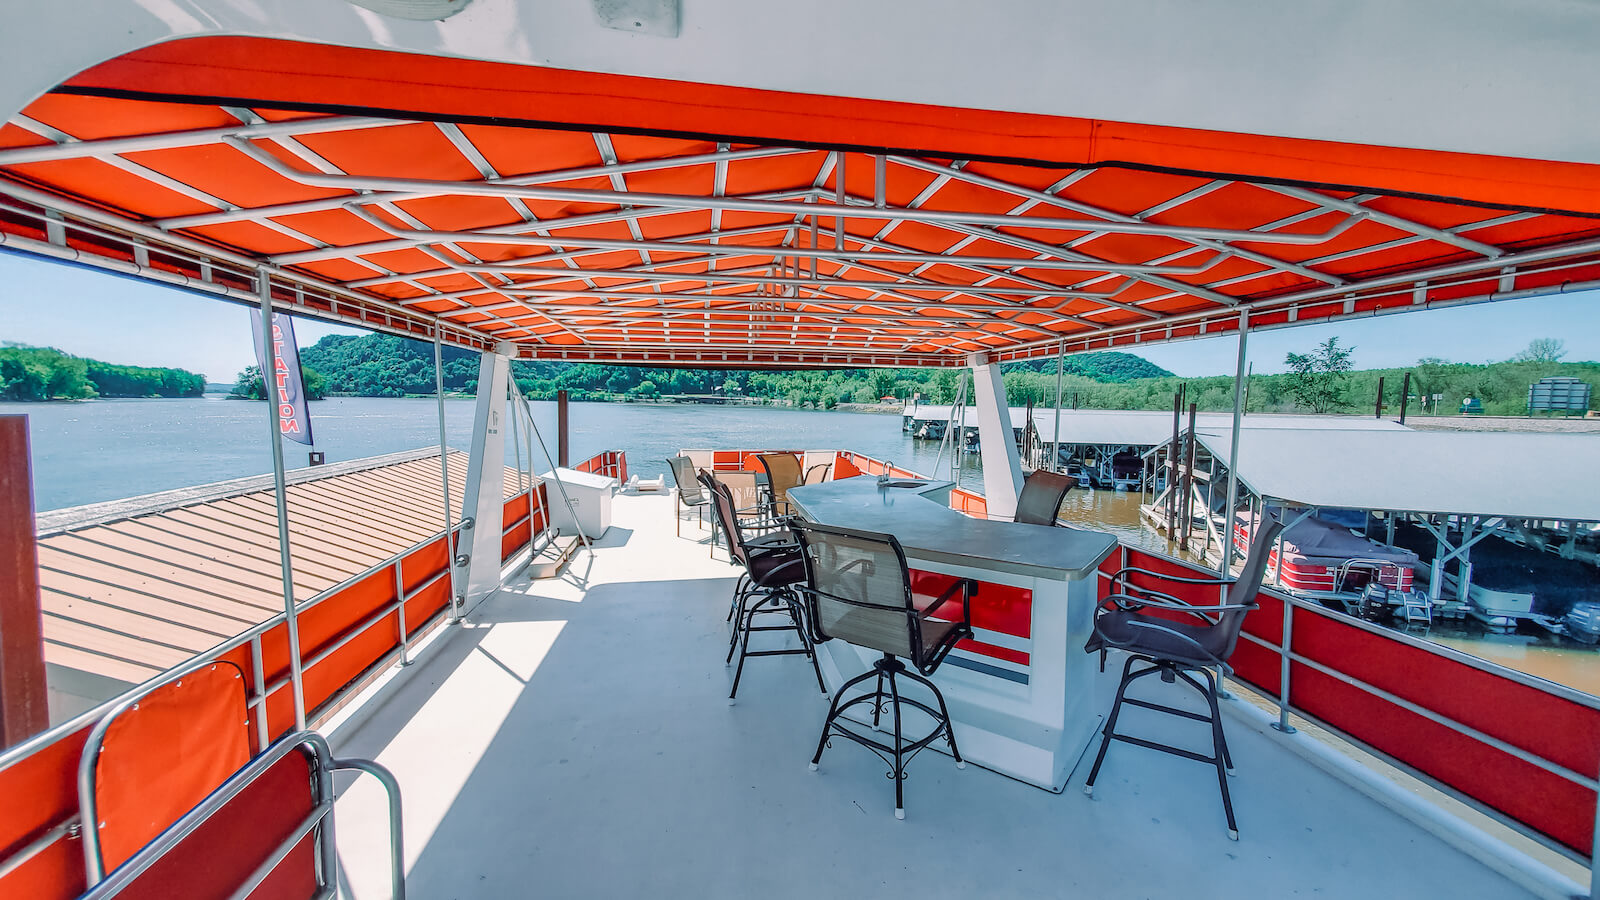 S&S Rentals Riverview 62' houseboat in the Mississippi River near Lansing, Iowa